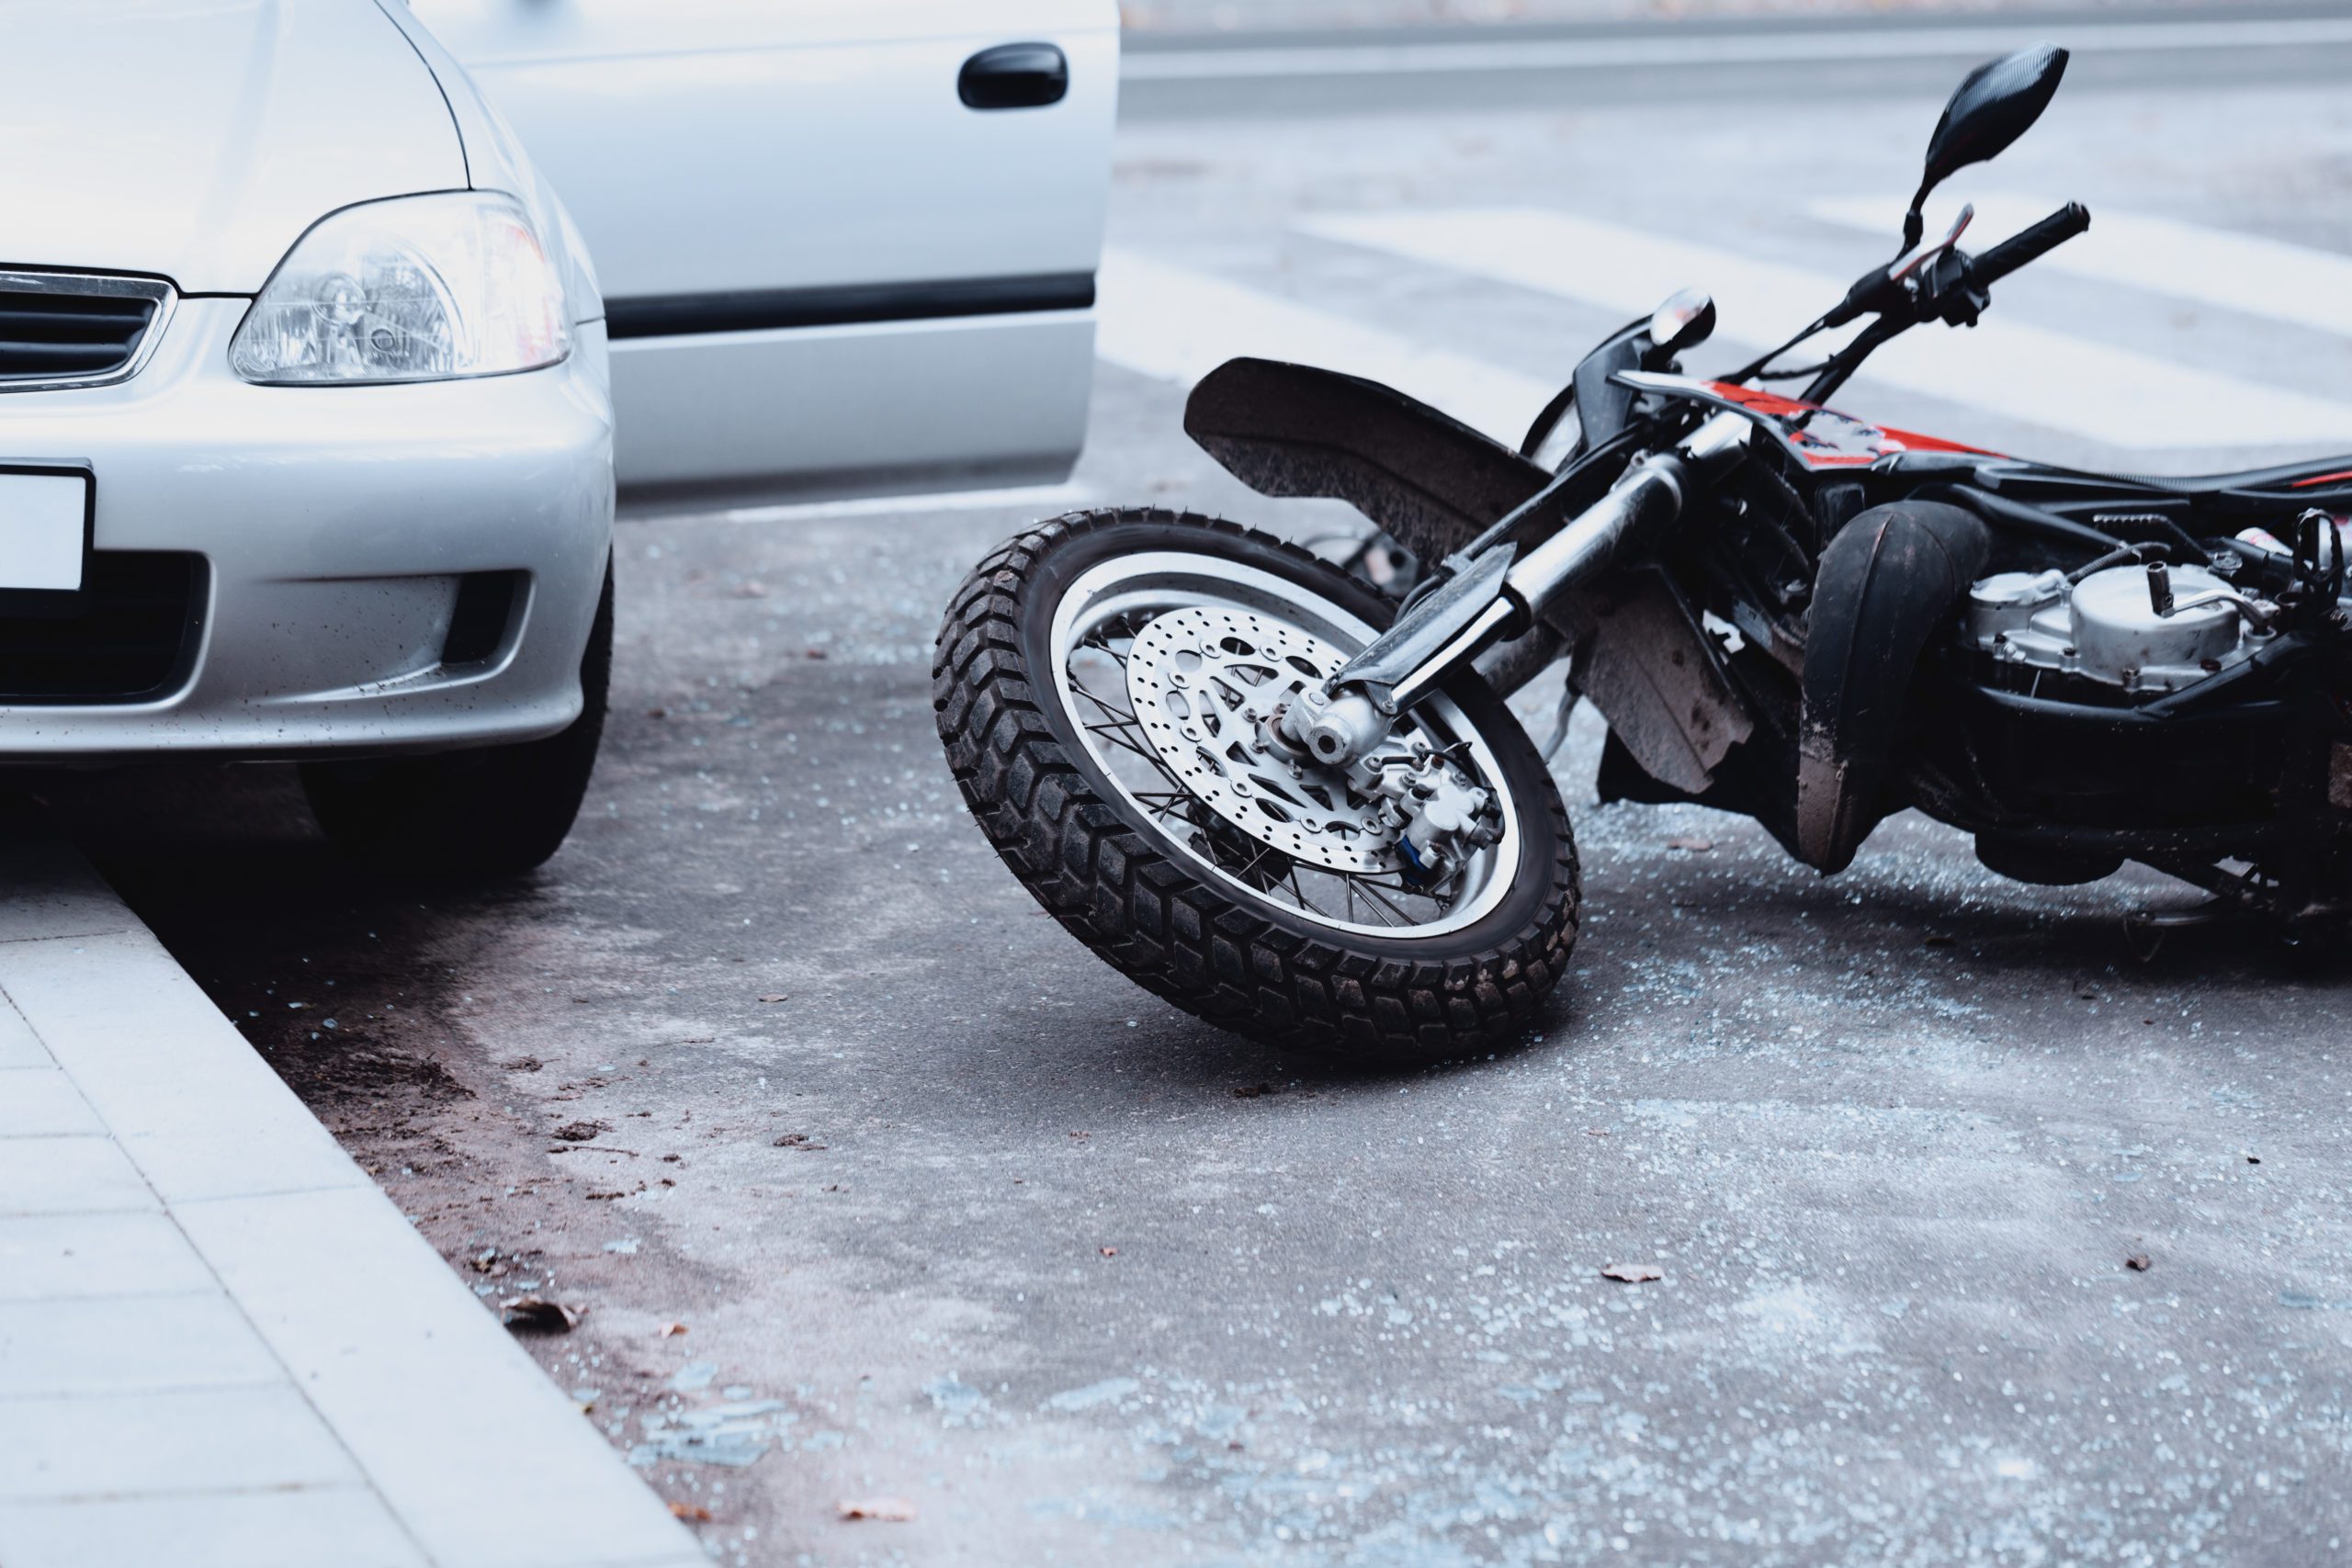 Hit By An Uninsured Or Underinsured Motorist? Here’s What You Should Do